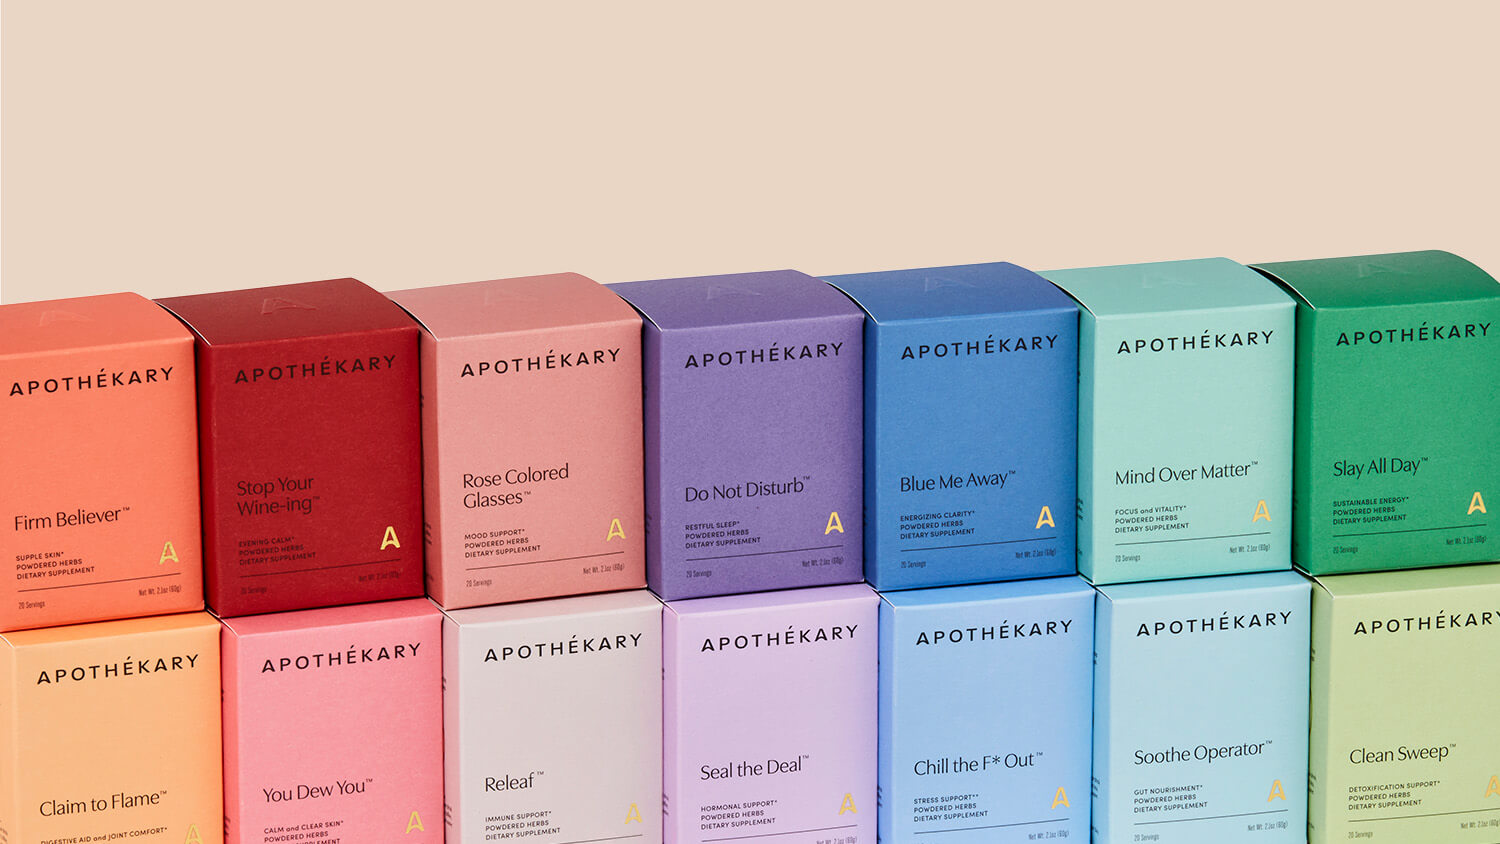 Timia Lewis Execute Forner Studio’s Vision, Building off their Branding to Create Apothekary’s Packaging Design